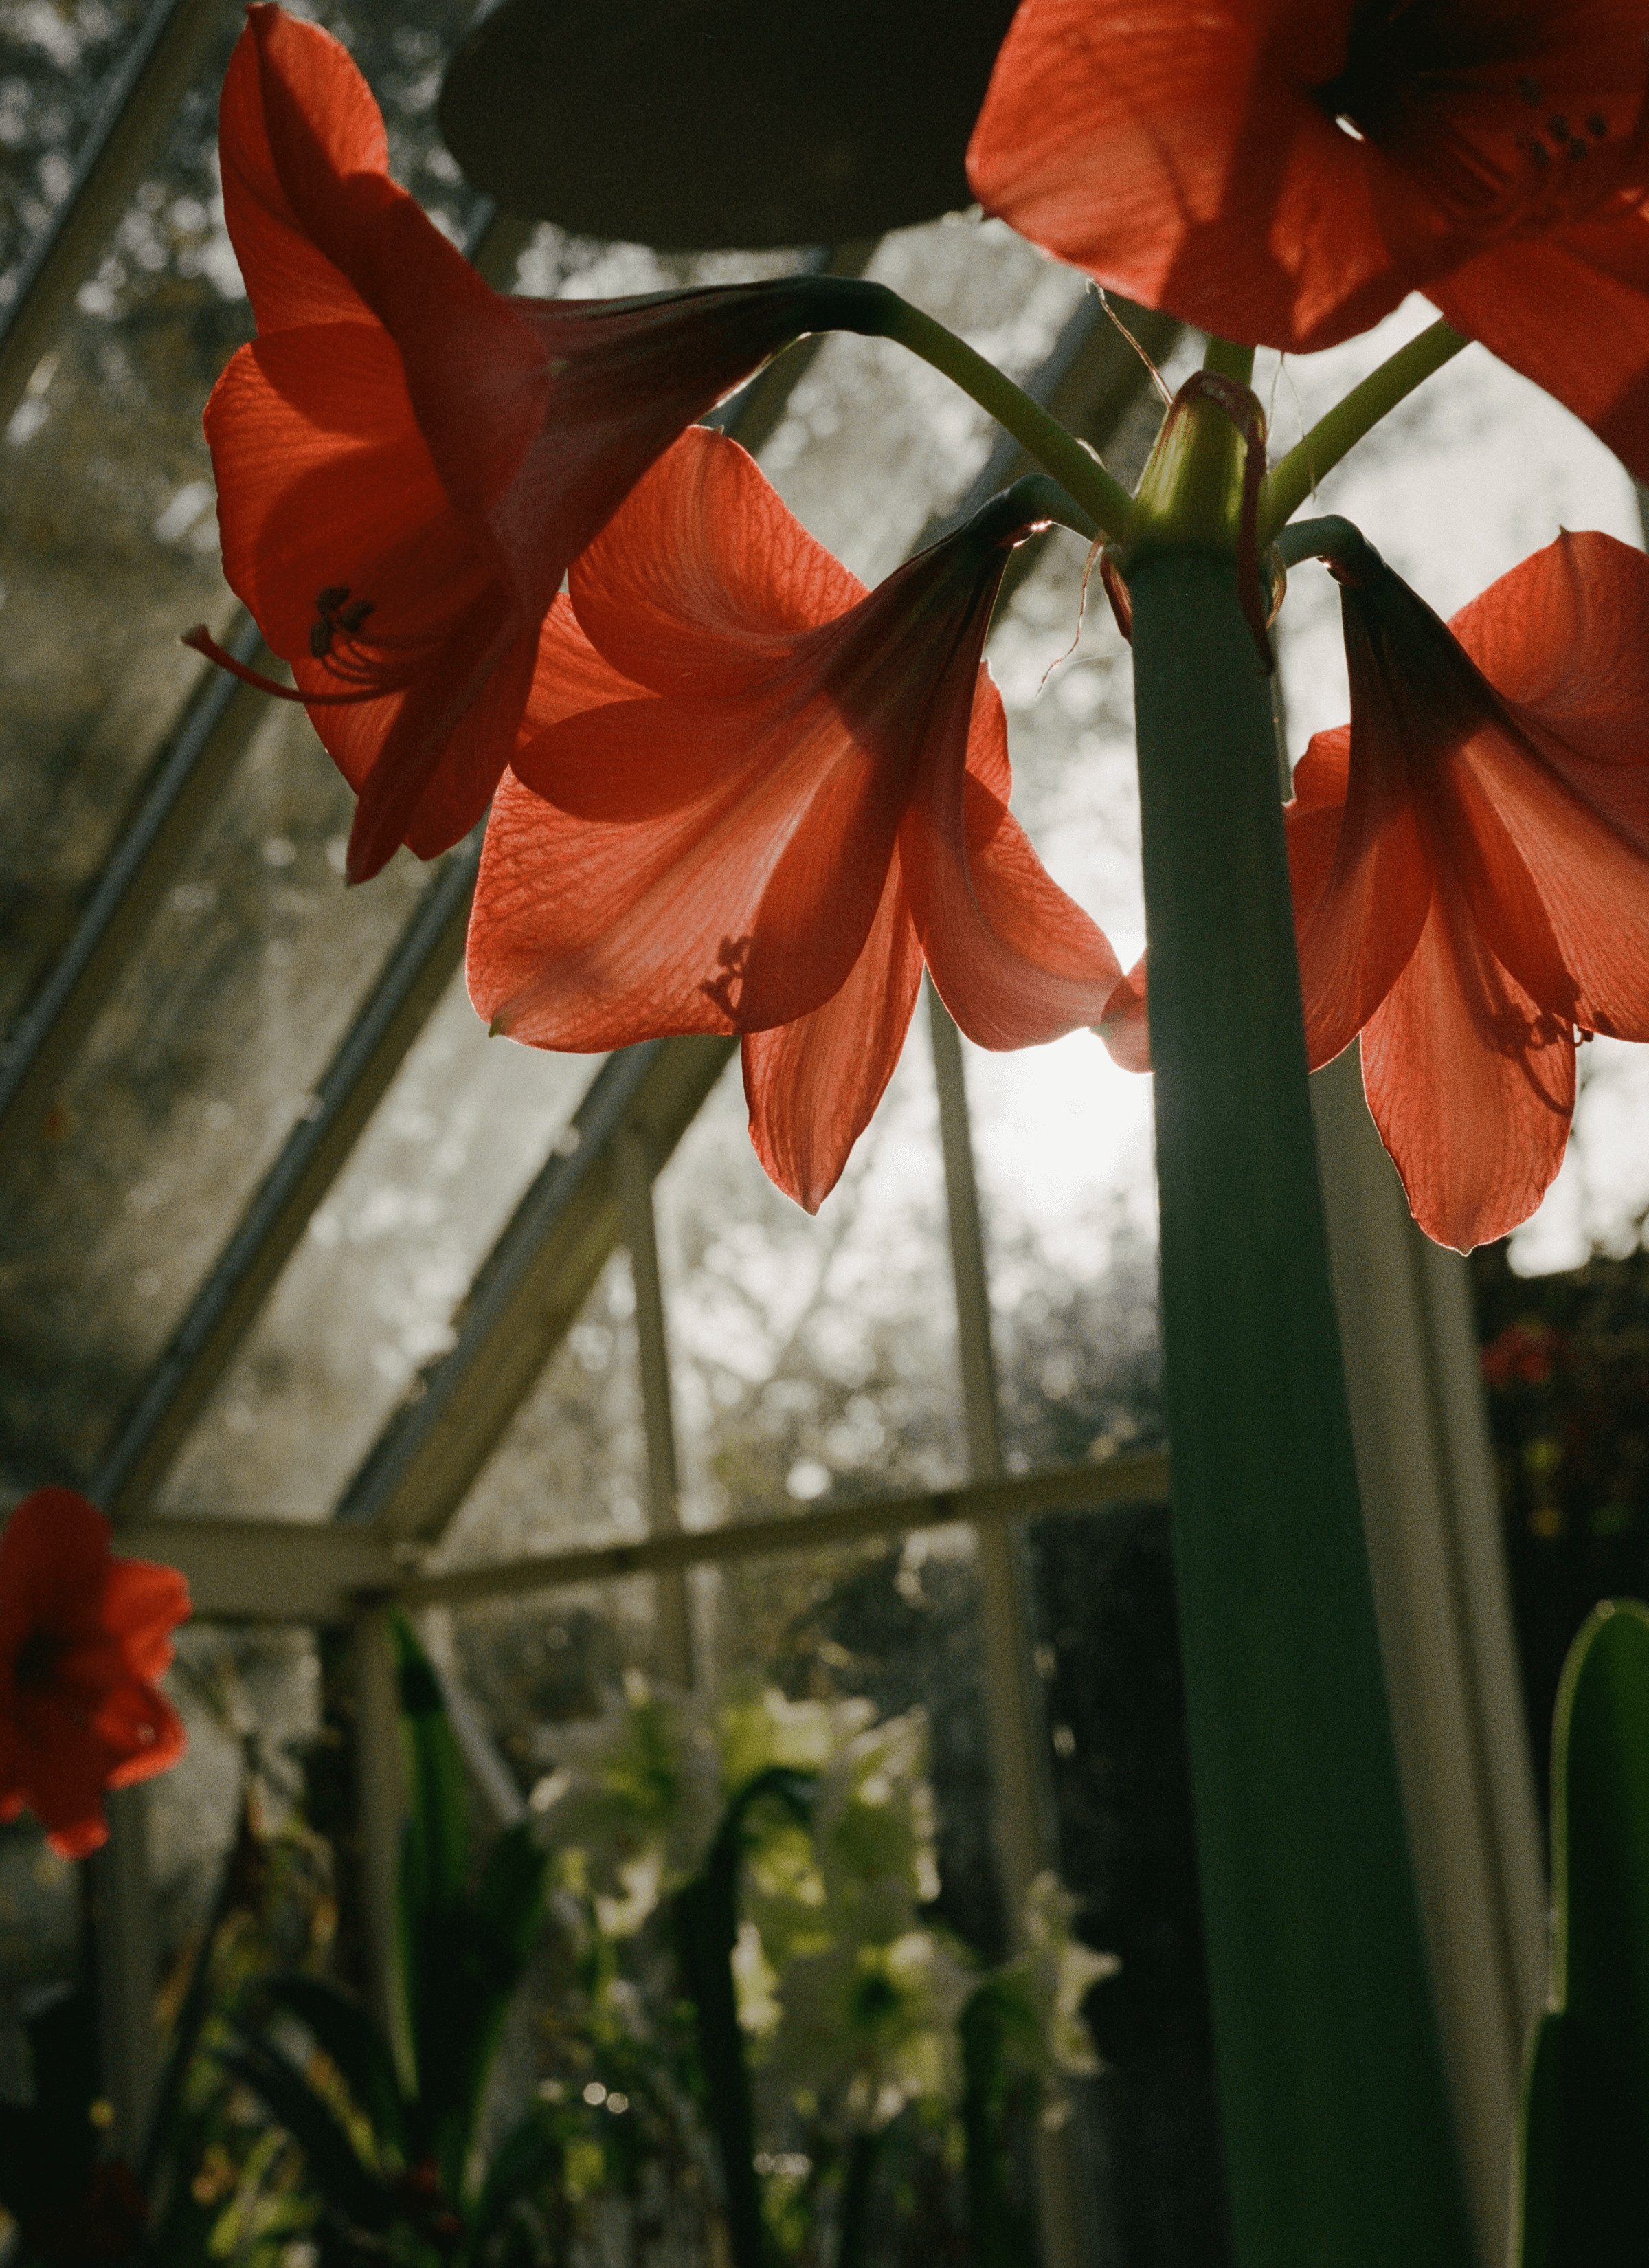 A photograph of a pot of Amaryllis with reddish-orange petals in a dark volume.